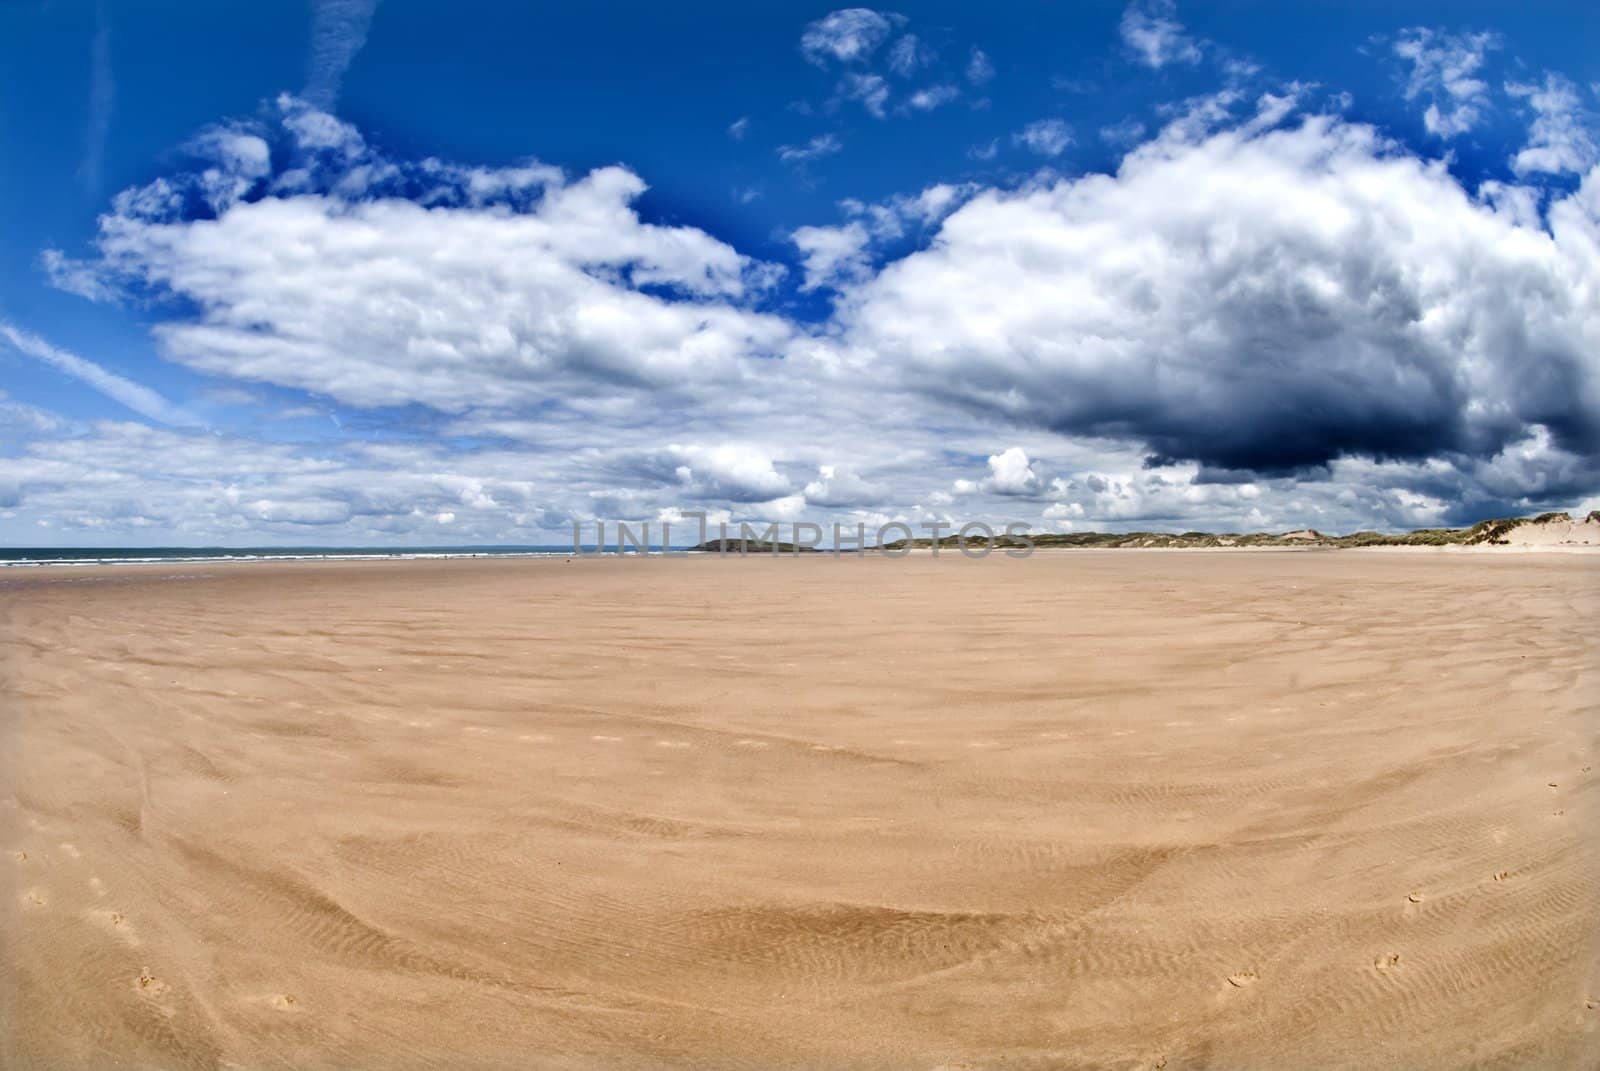 wide empty beach gower wales with blue skies and white clouds